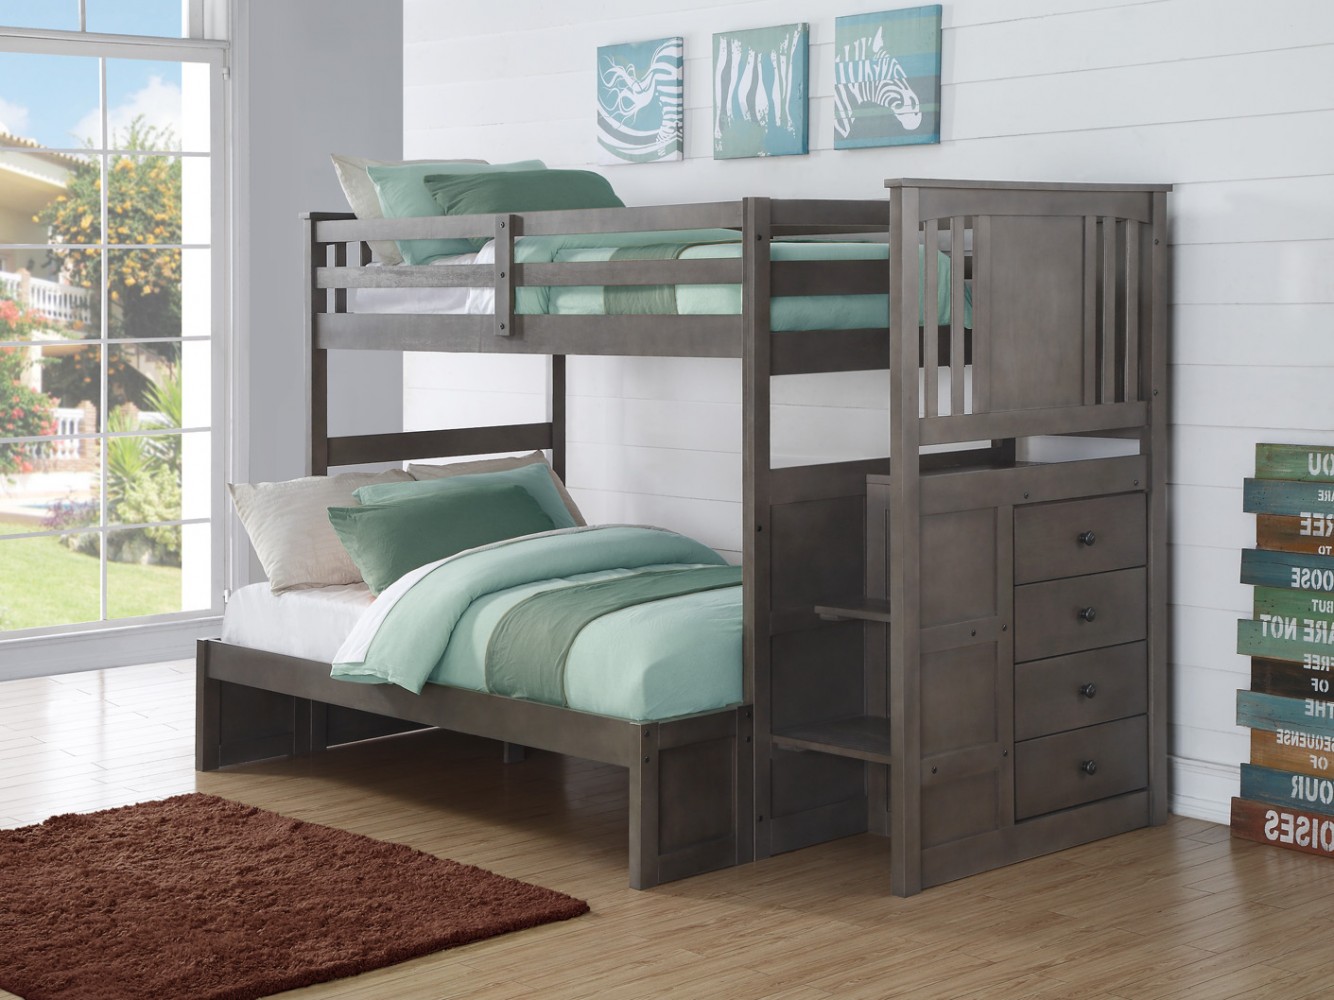 Donco Kids Slate Grey Twin/Full Bunk Bed